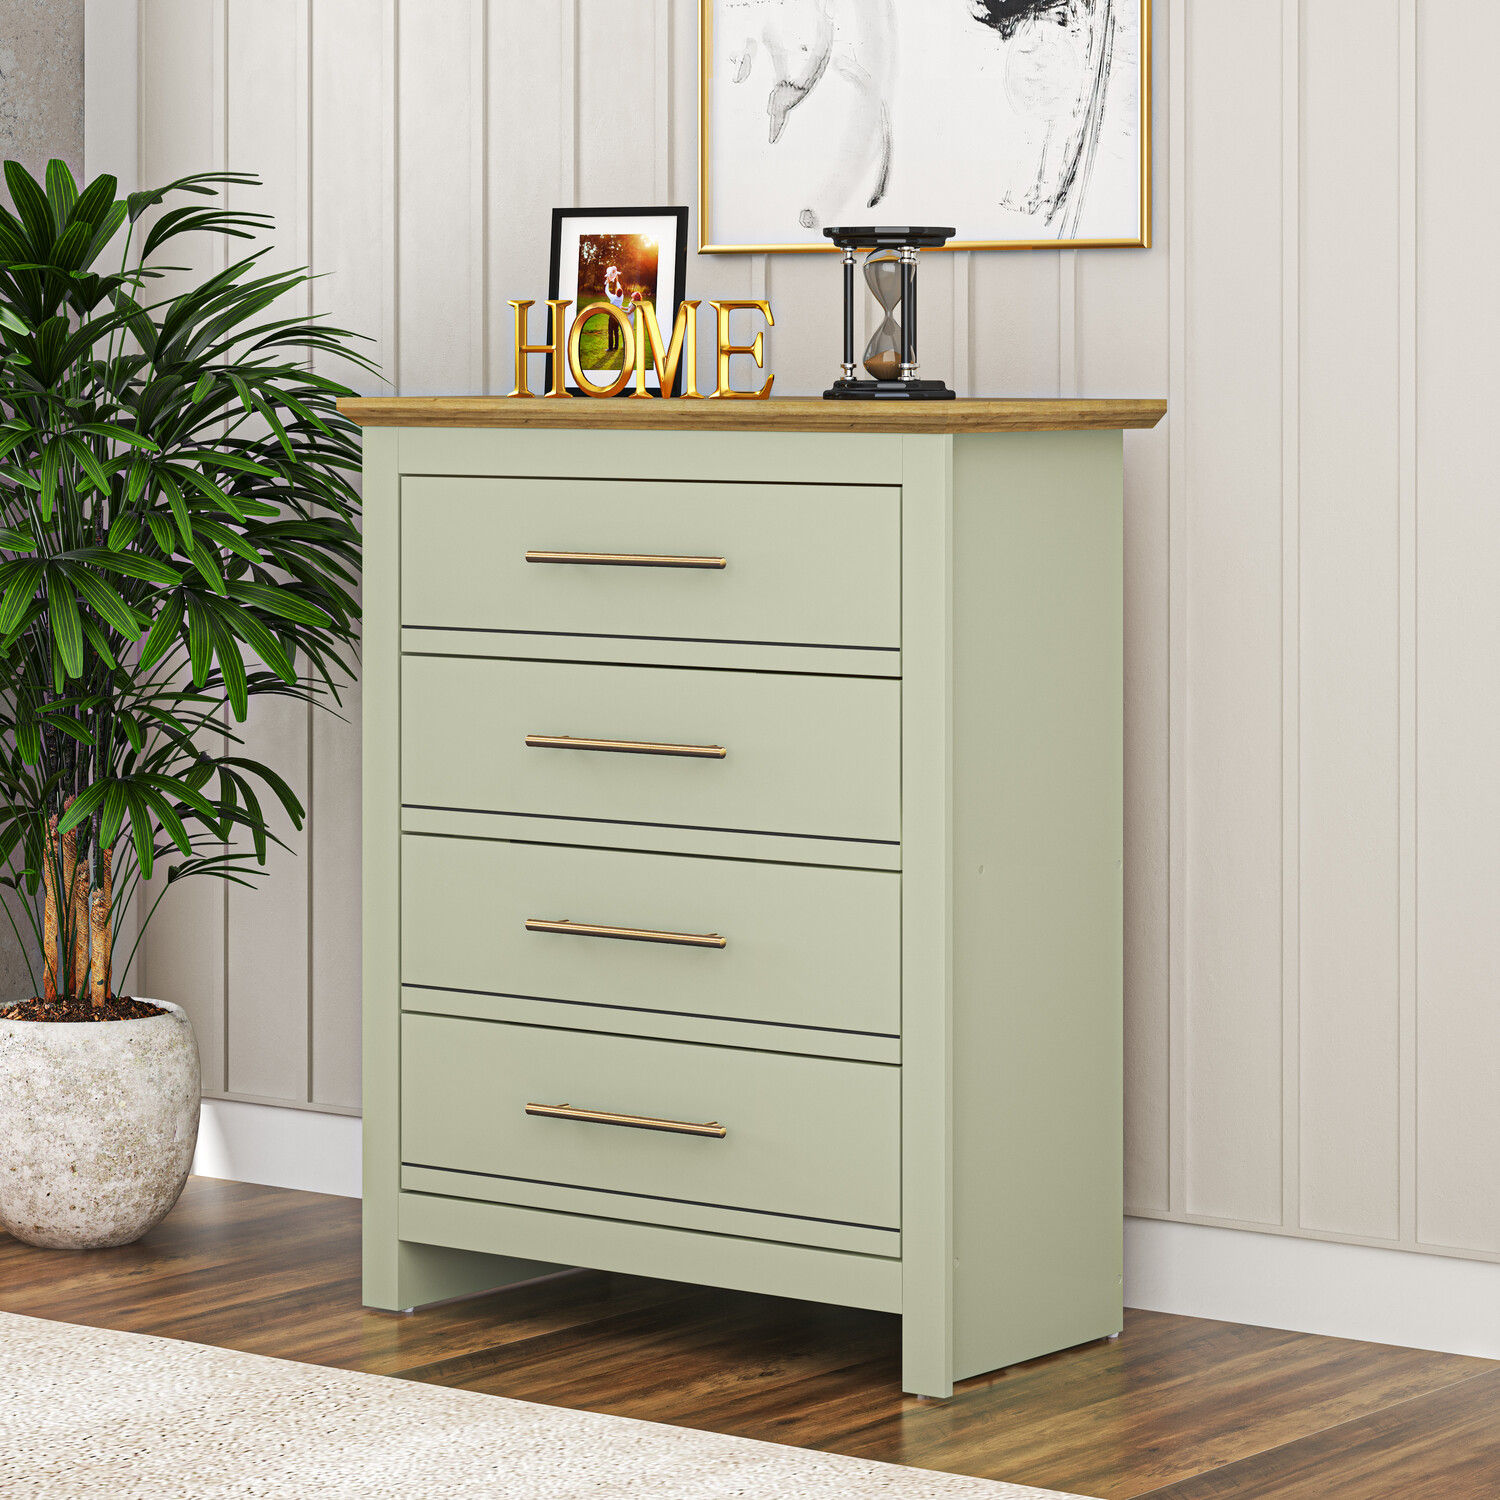 Bexley 4 Drawer Sage Green Chest of Drawers Image 7